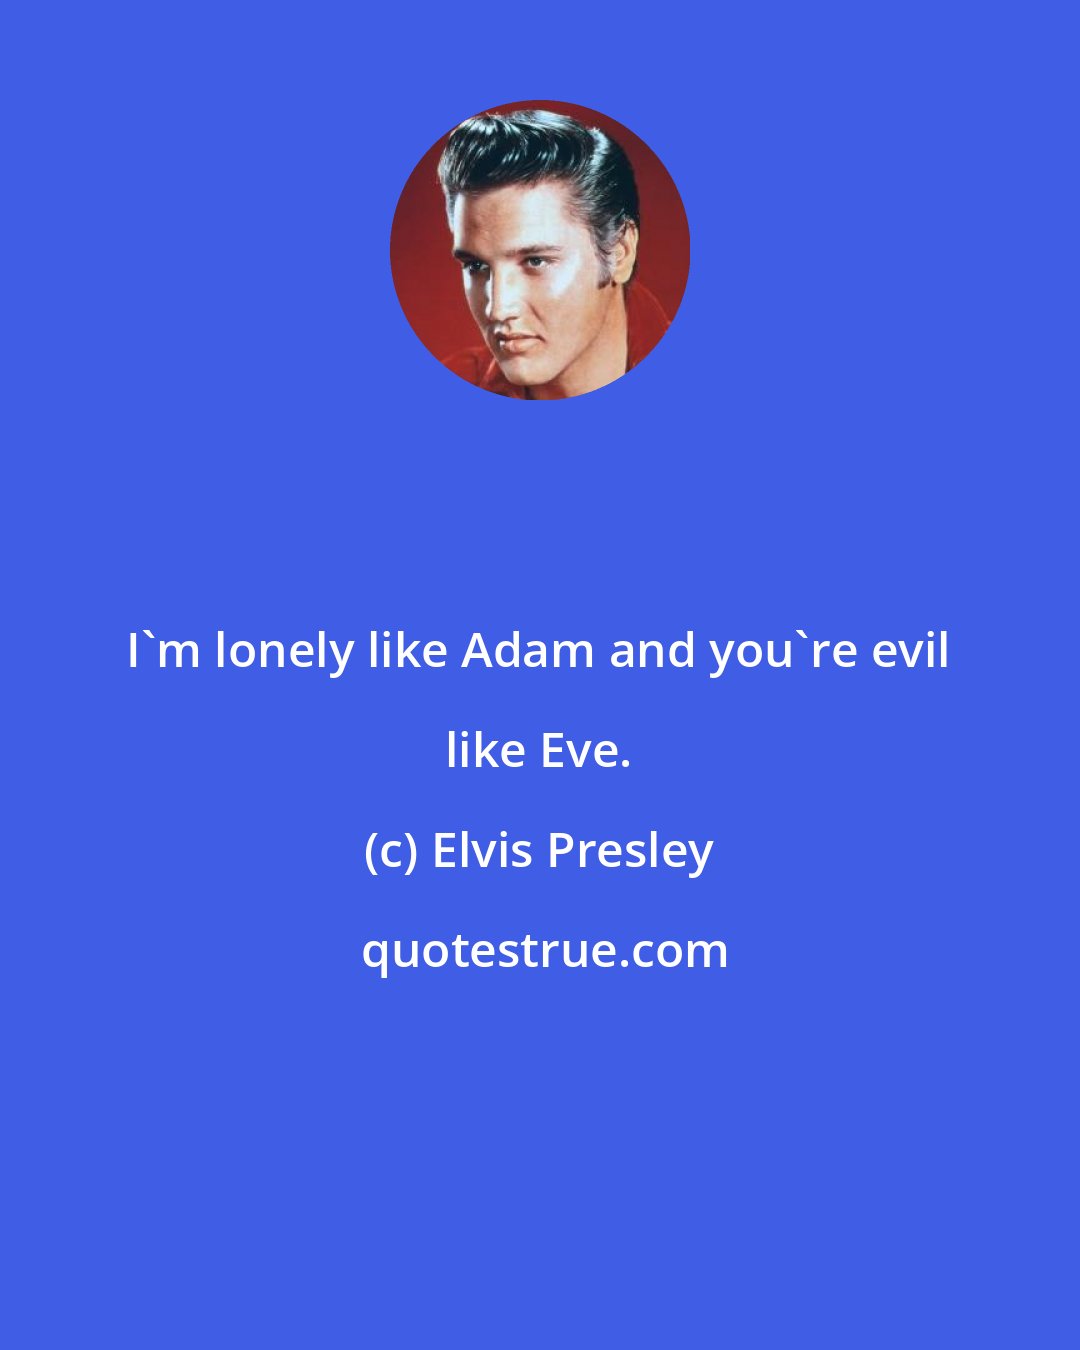 Elvis Presley: I'm lonely like Adam and you're evil like Eve.